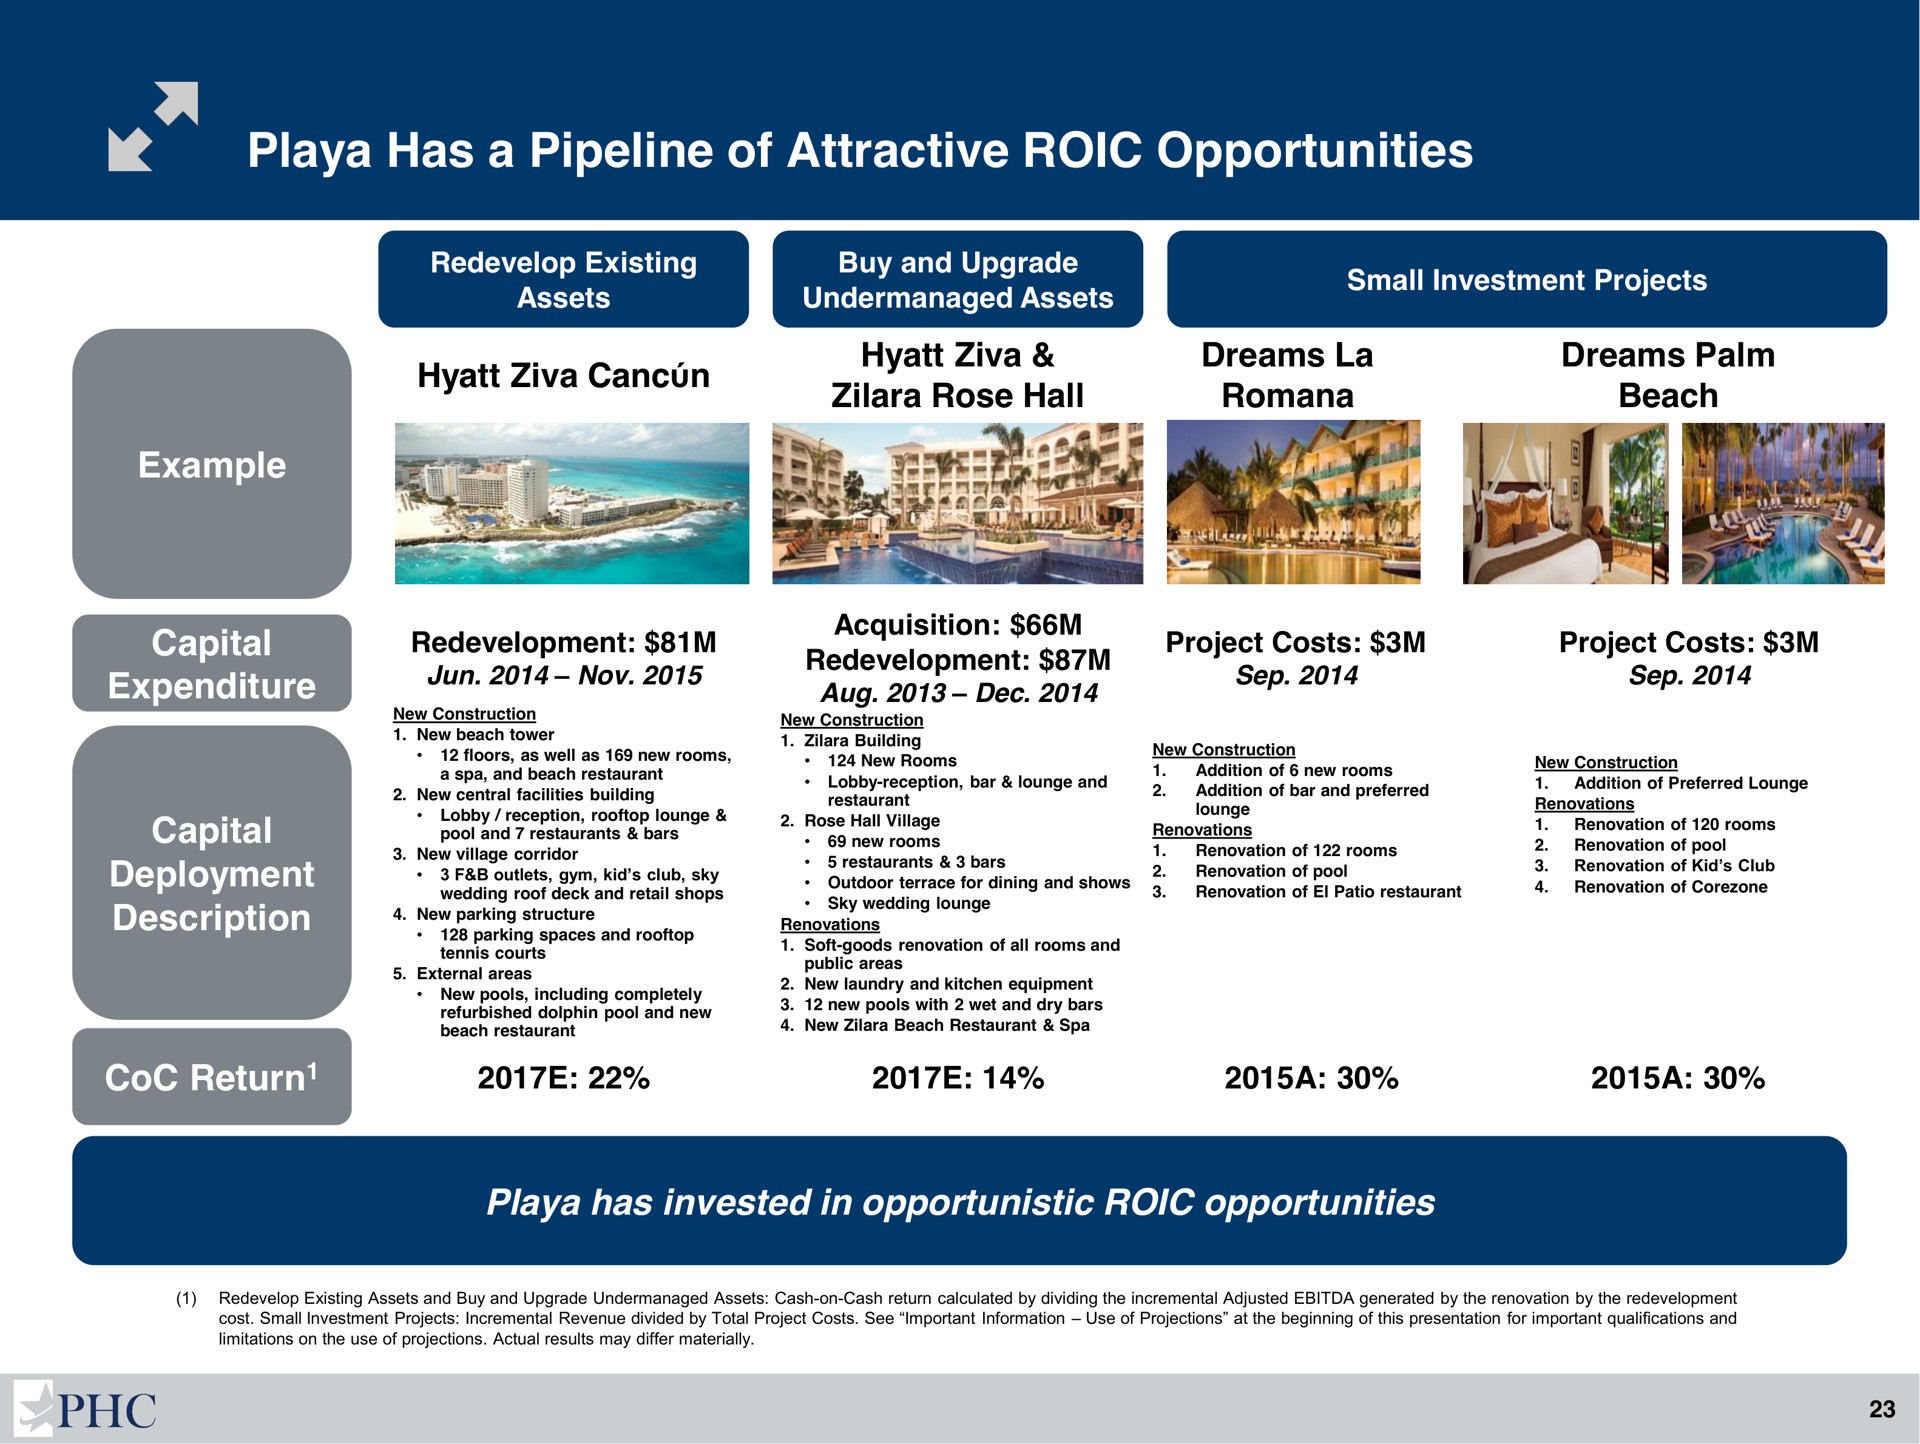 playa has a pipeline of attractive opportunities | Playa Hotels